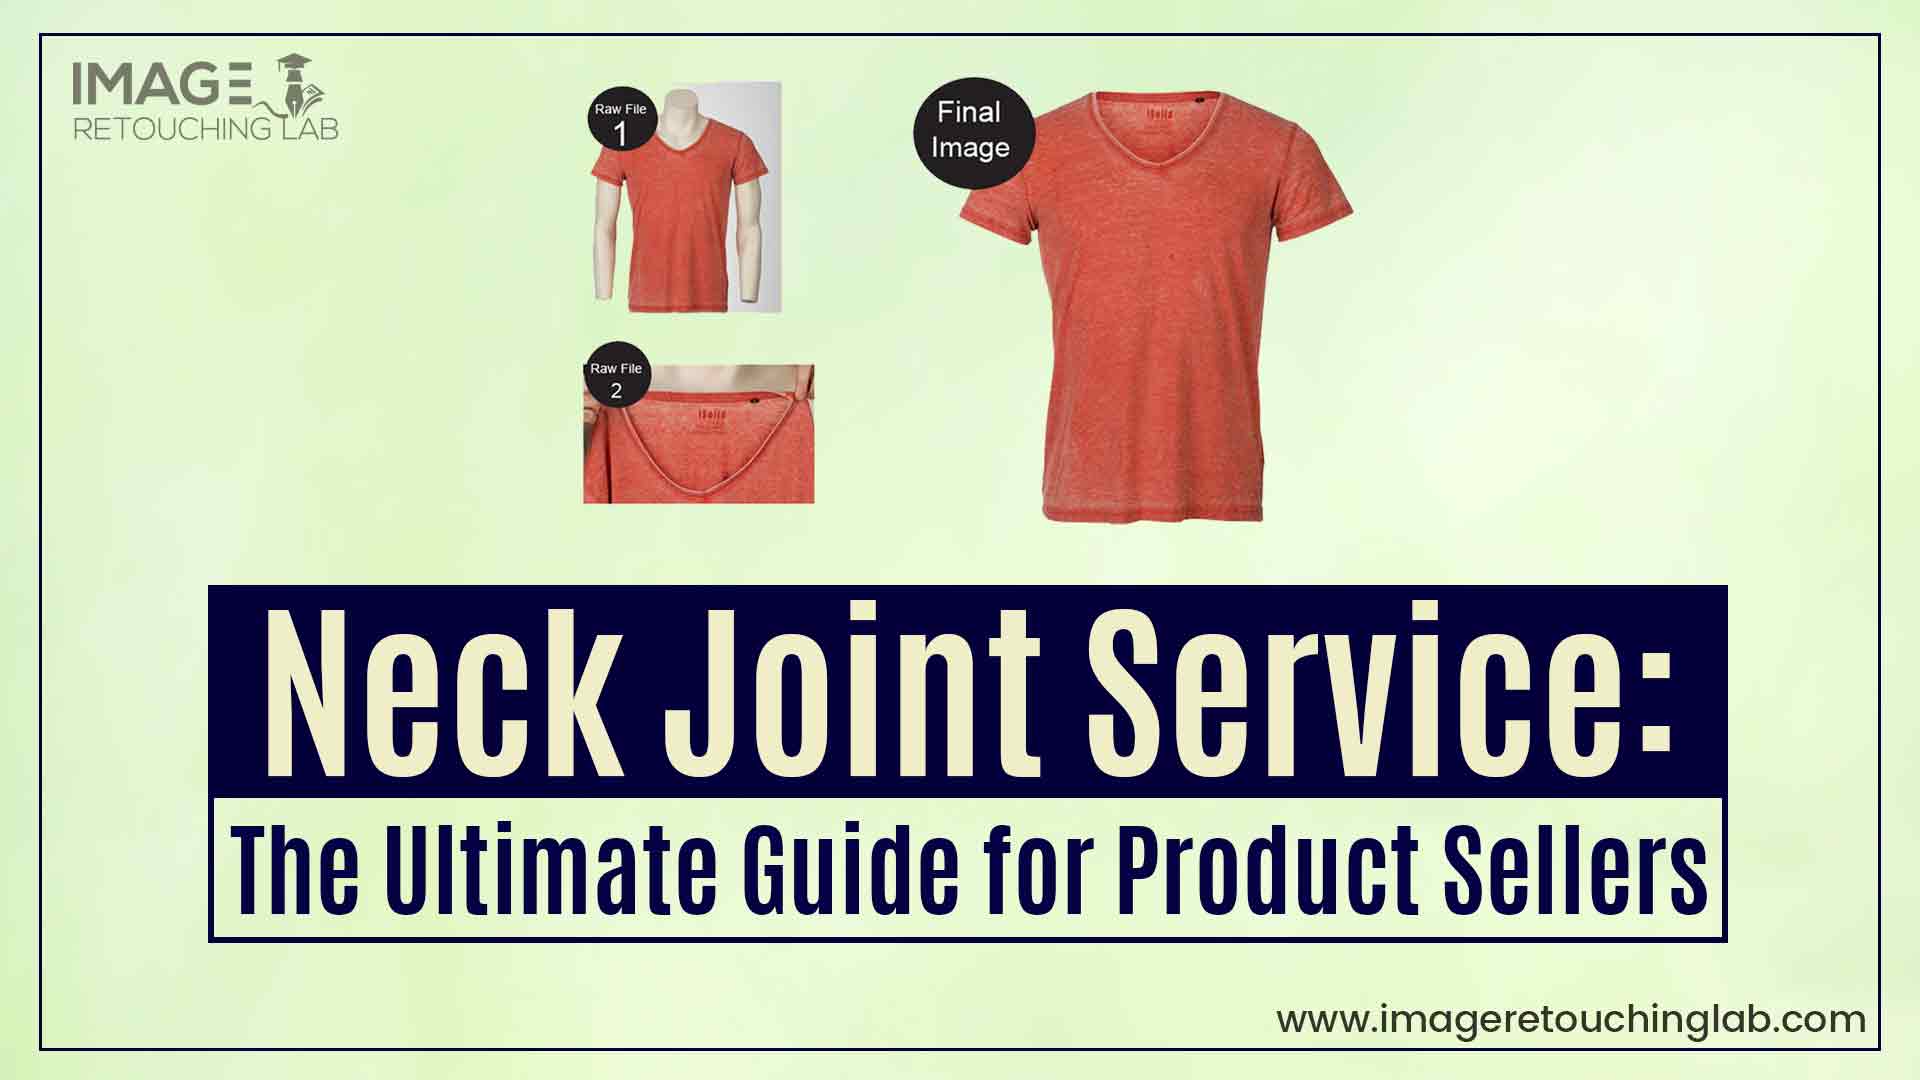 Neck Joint service new